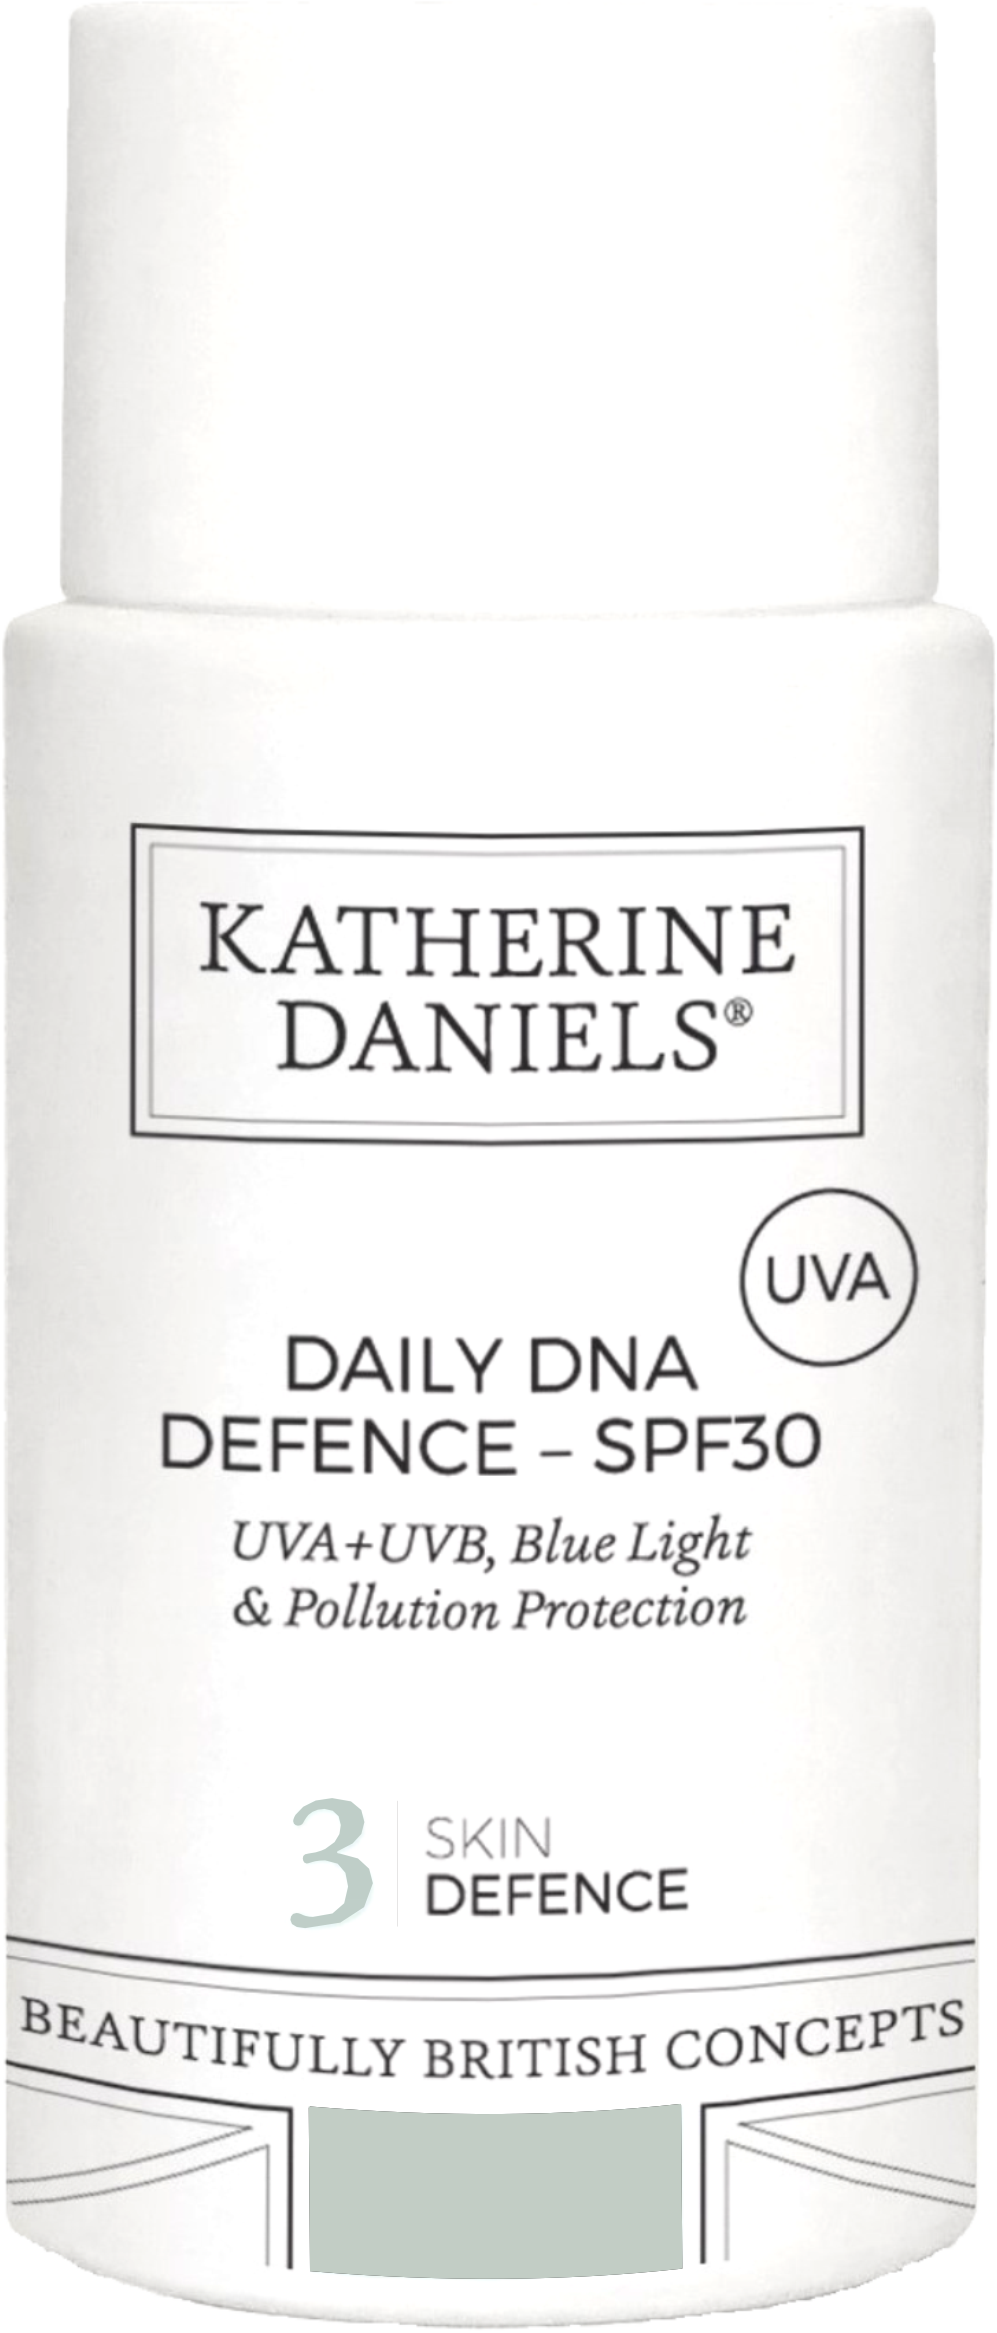 Katherine Daniels Daily Defence SP30